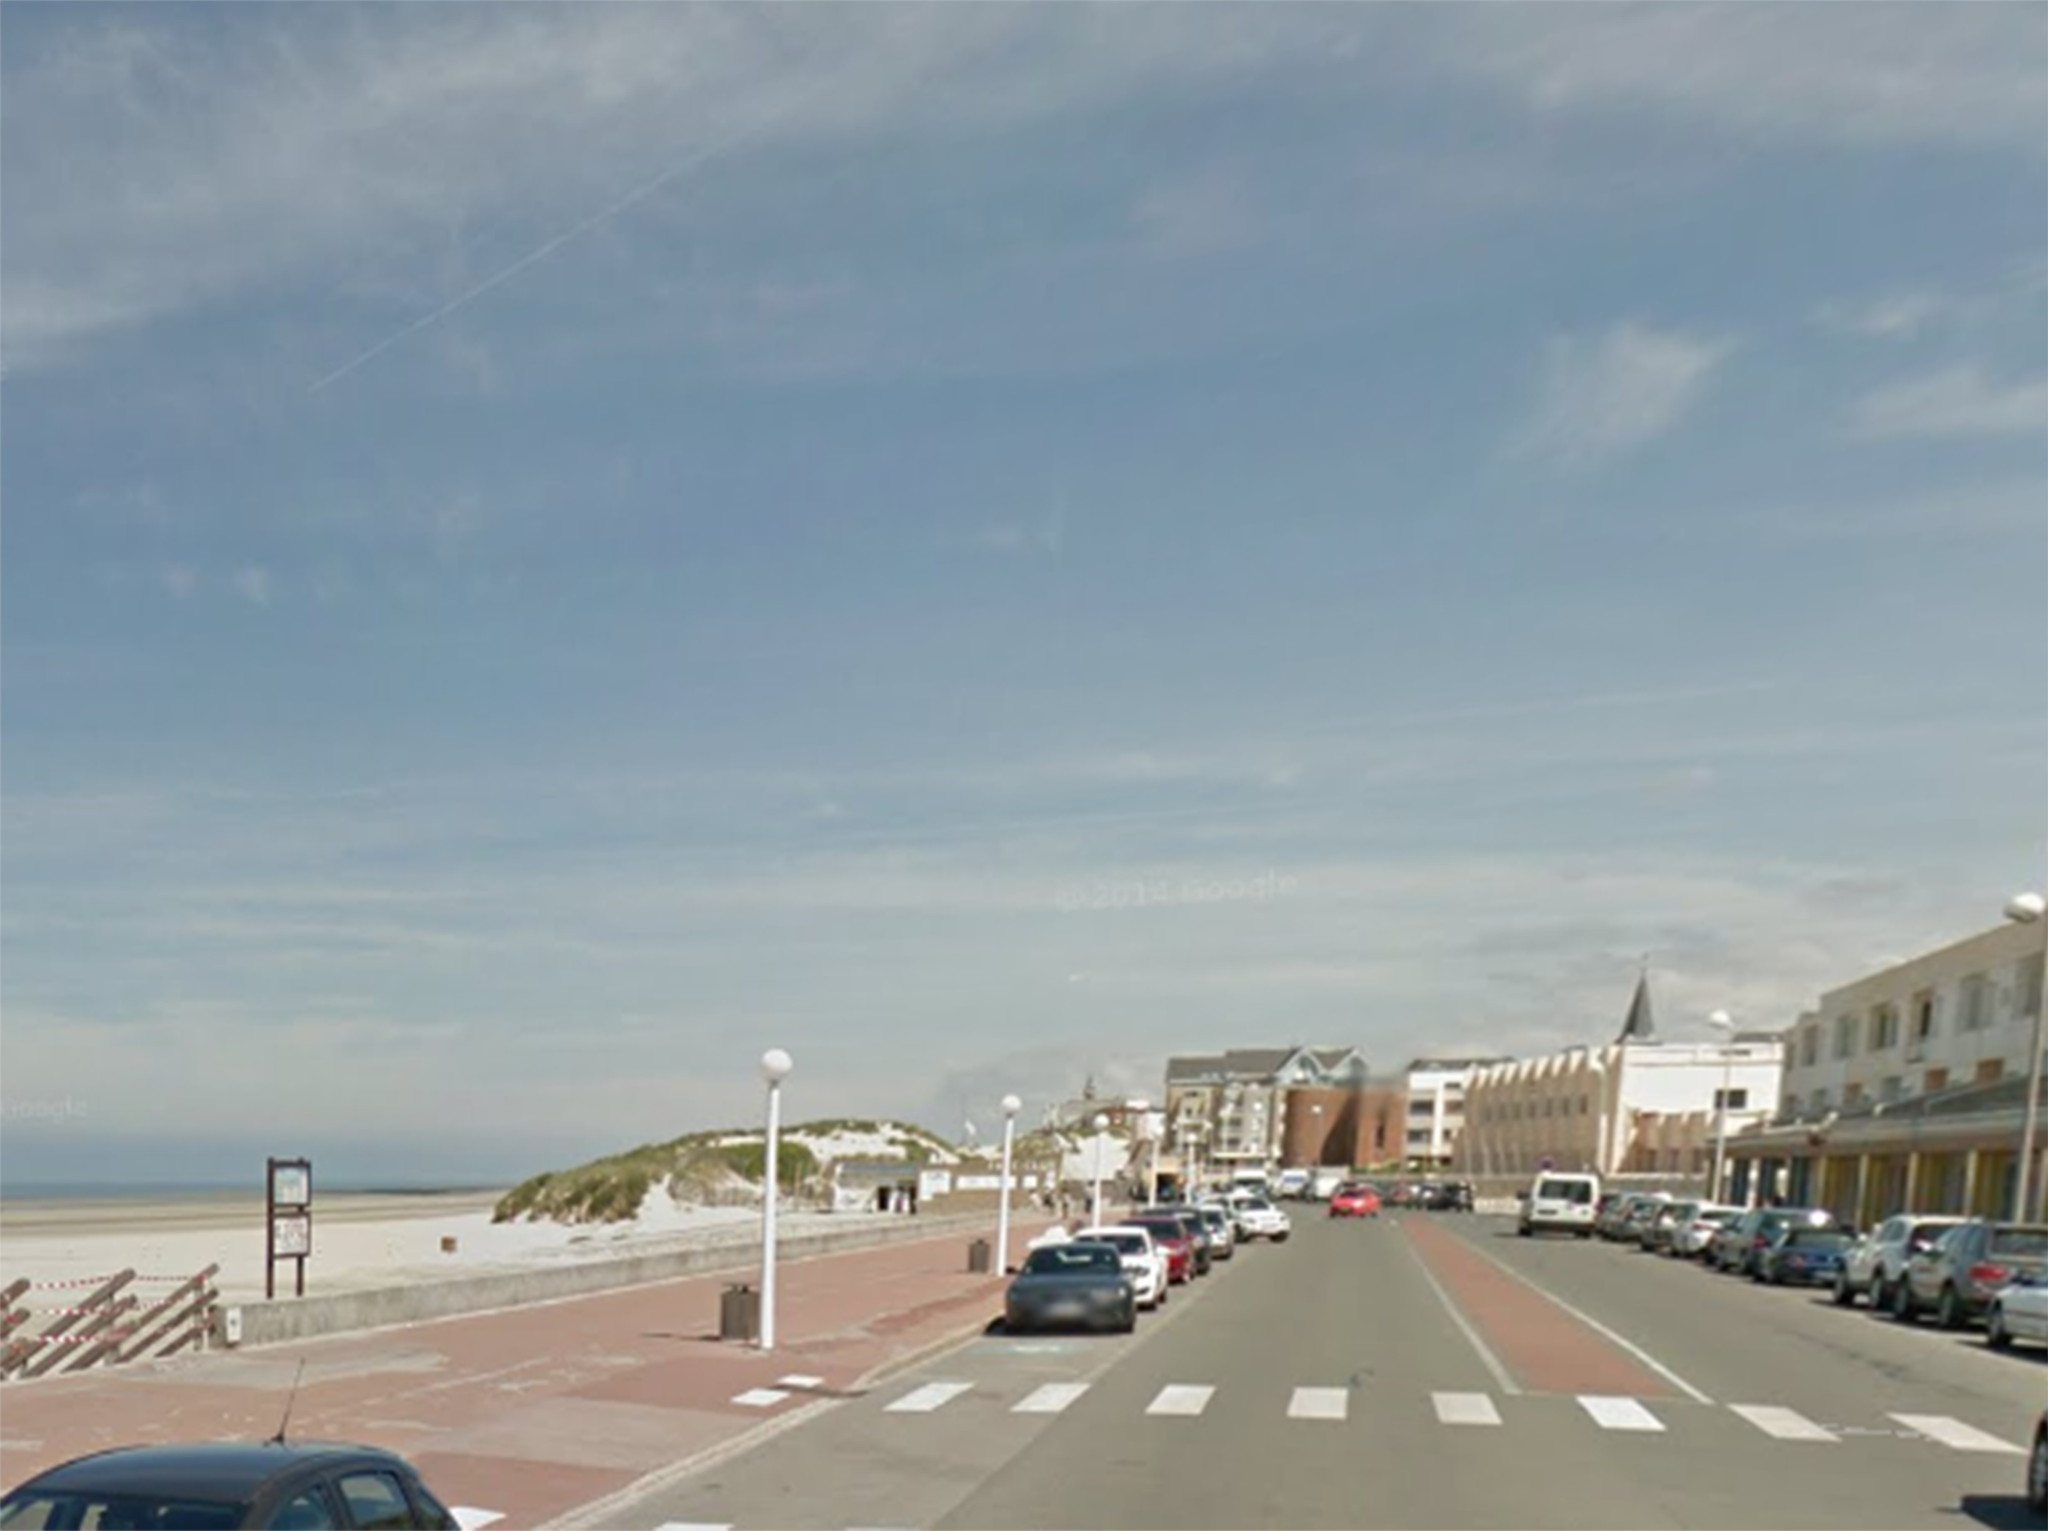 Berck-sur-Mer in northern France where the 15-month-old was left to drown